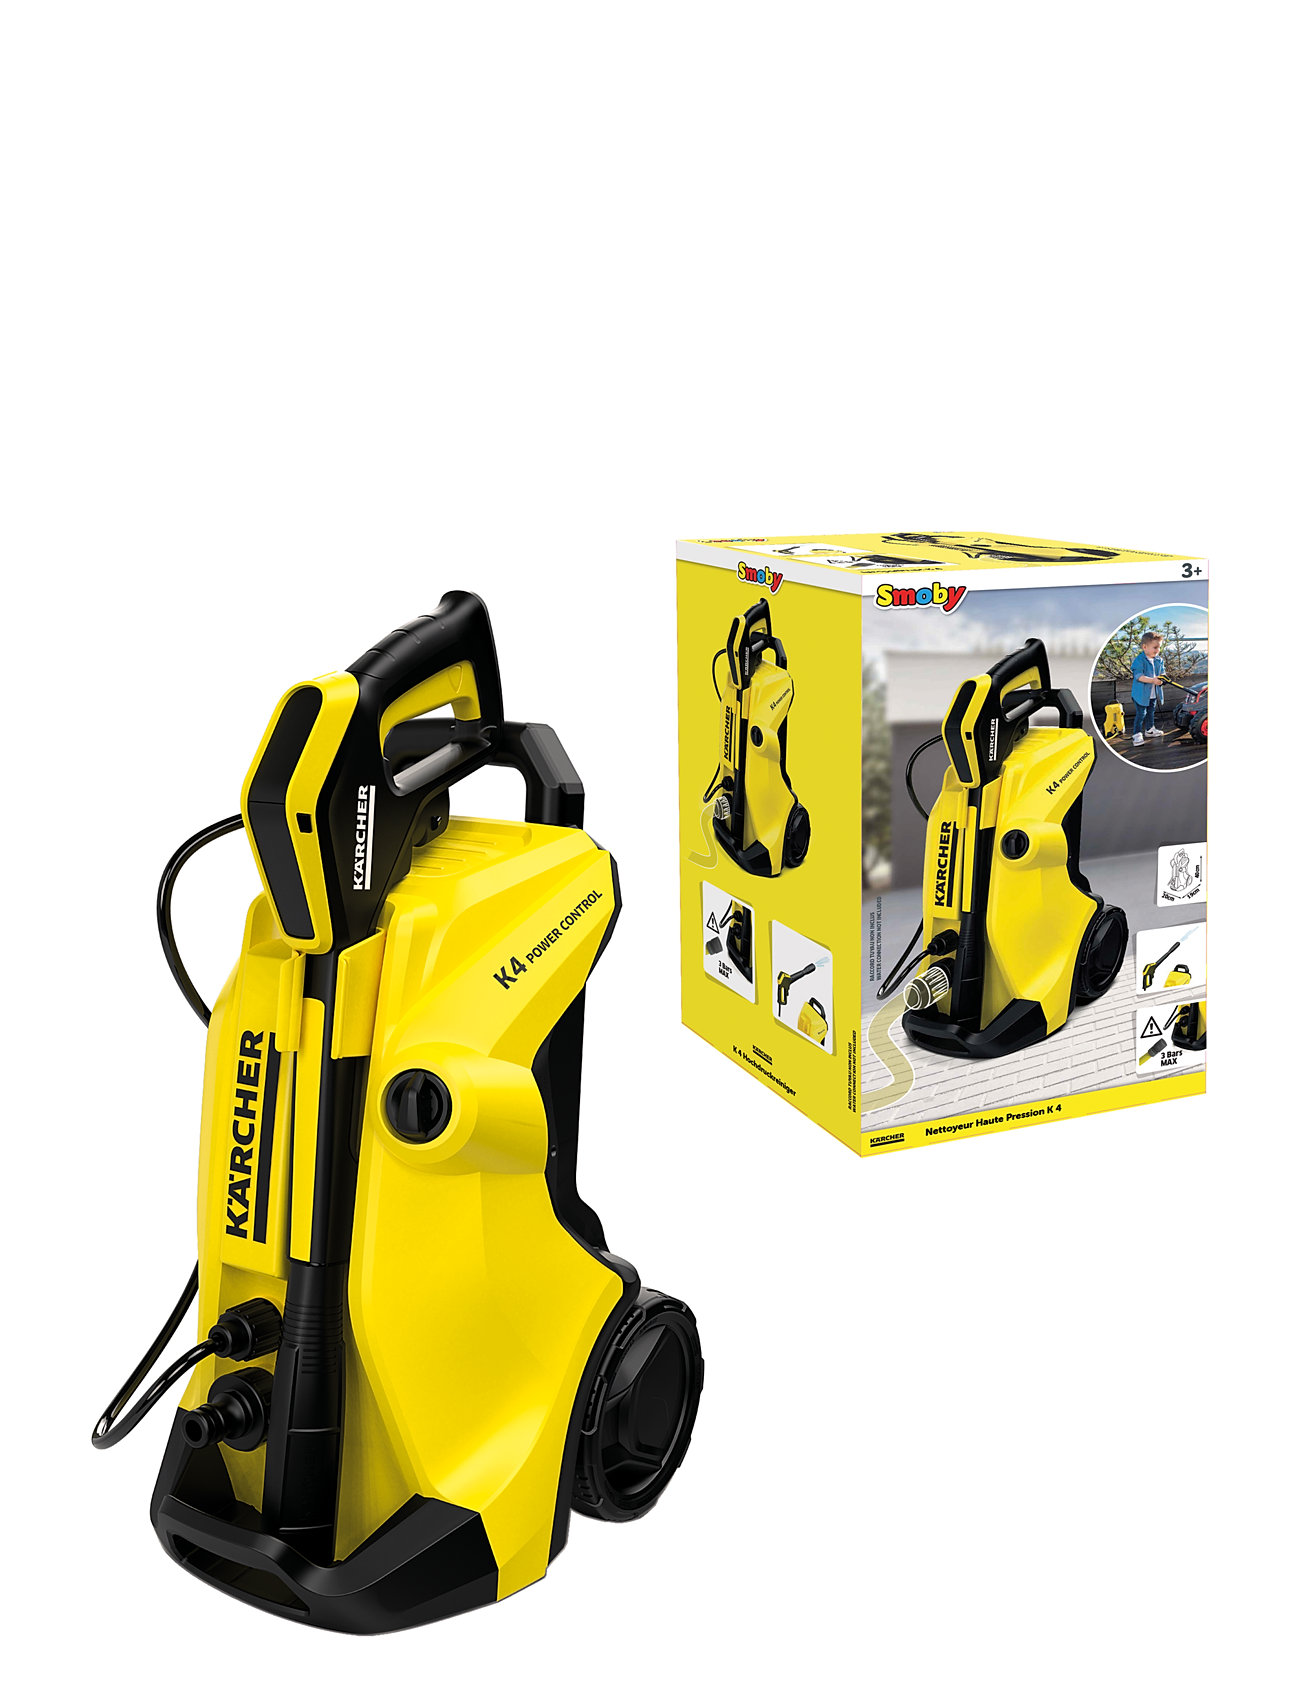 Smoby Kärcher K4 High Pressure Washer Toys Role Play Toy Tools Yellow Smoby